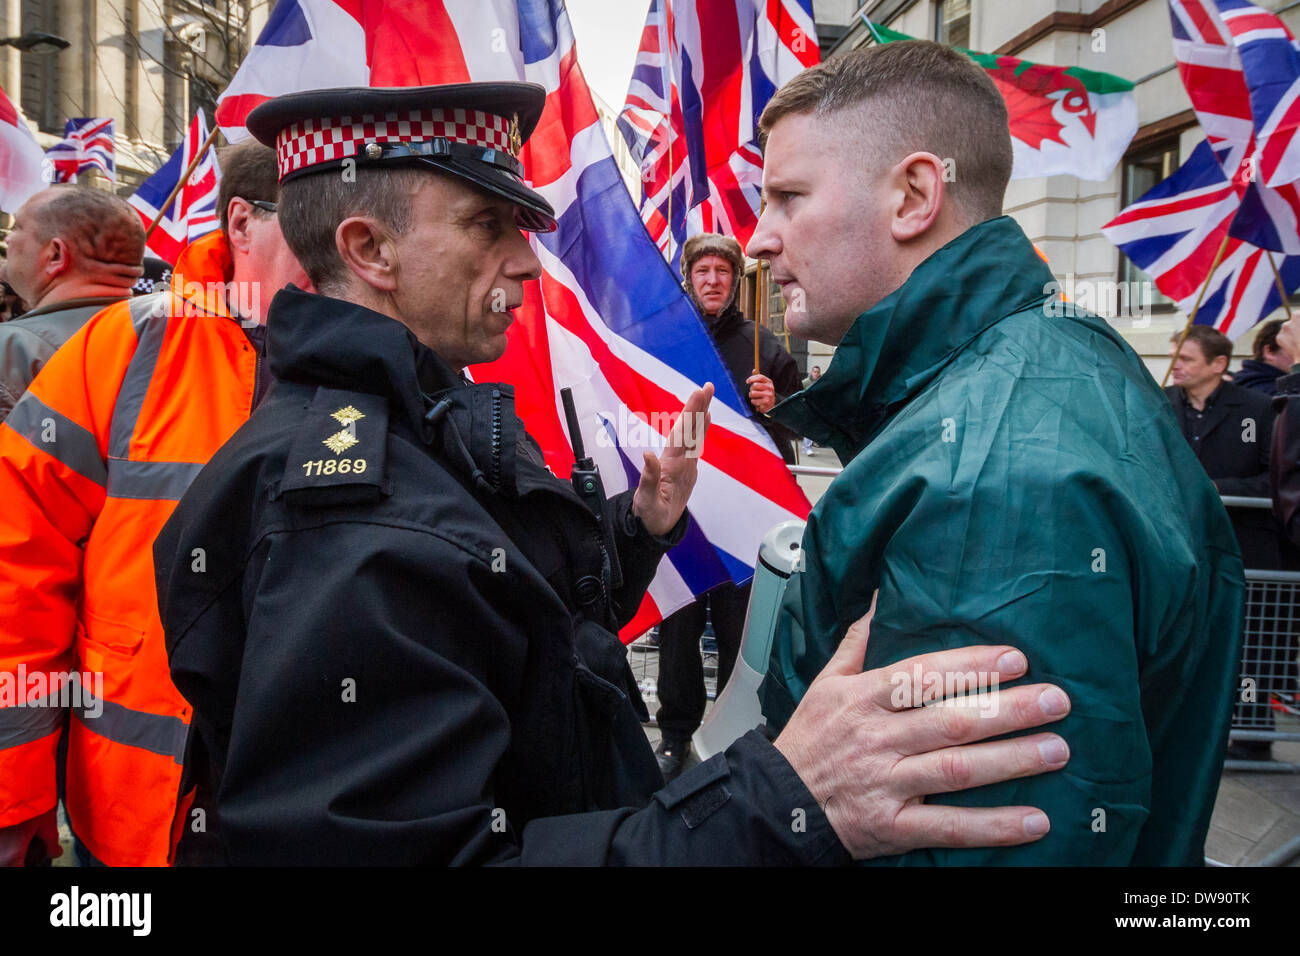 Paul Golding (R) leader of Britain First right-wing movement outside Old Bailey court on the sentencing day of Lee Rigby's murderers. London, UK. Stock Photo